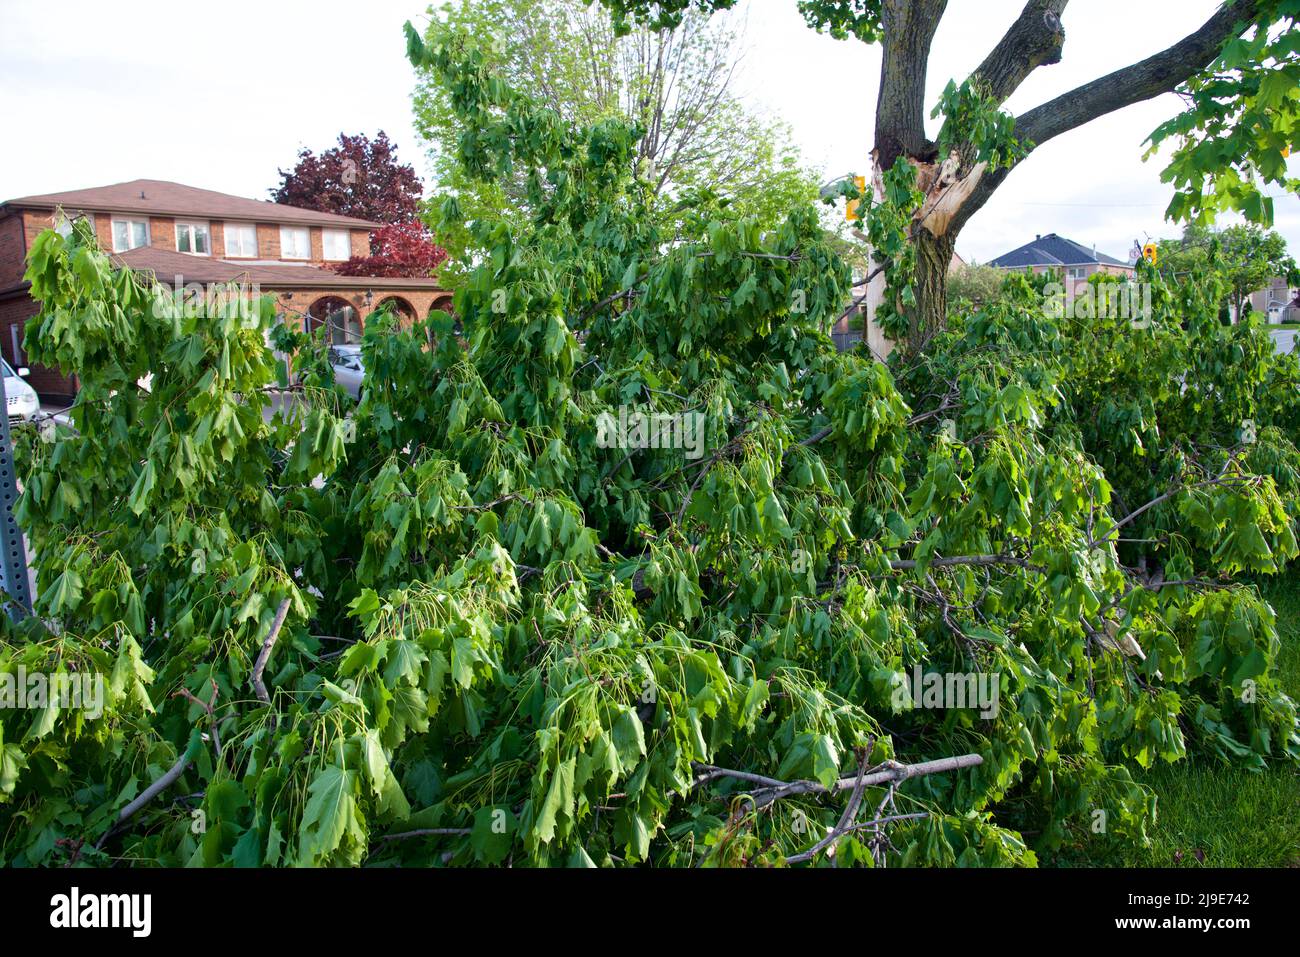 Strong winds and heavy rain cause toppling trees across parts of Ontario, Canada. Stock Photo